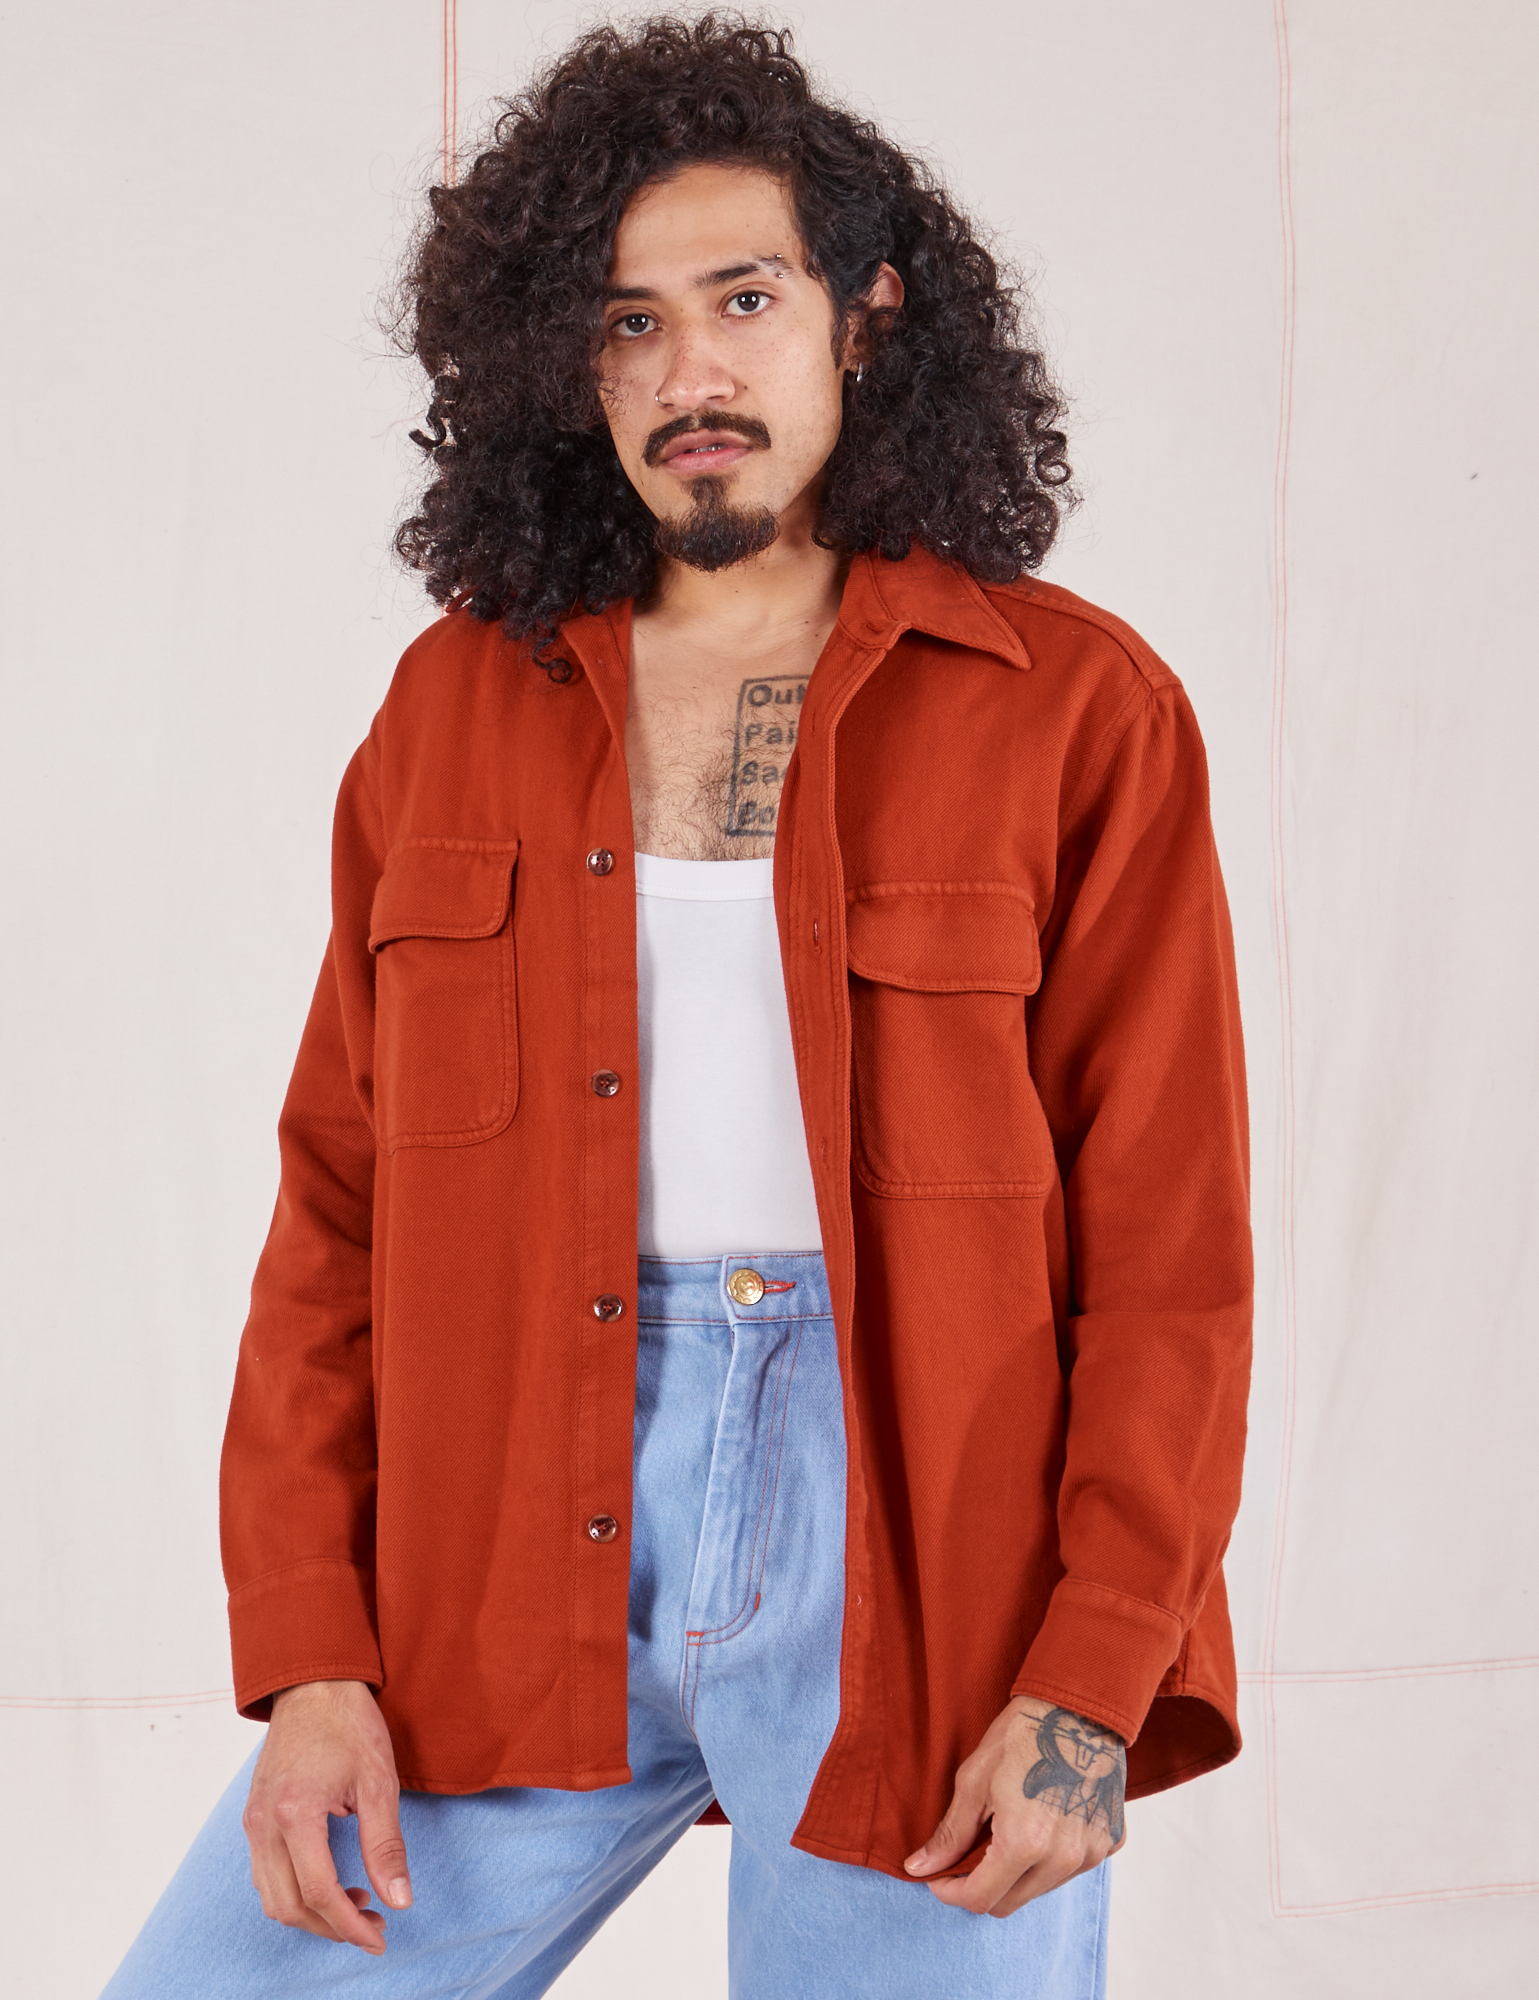 Jesse is wearing Flannel Overshirt in Paprika, vintage off-white Cropped Tank Top and light wash Trouser Jeans